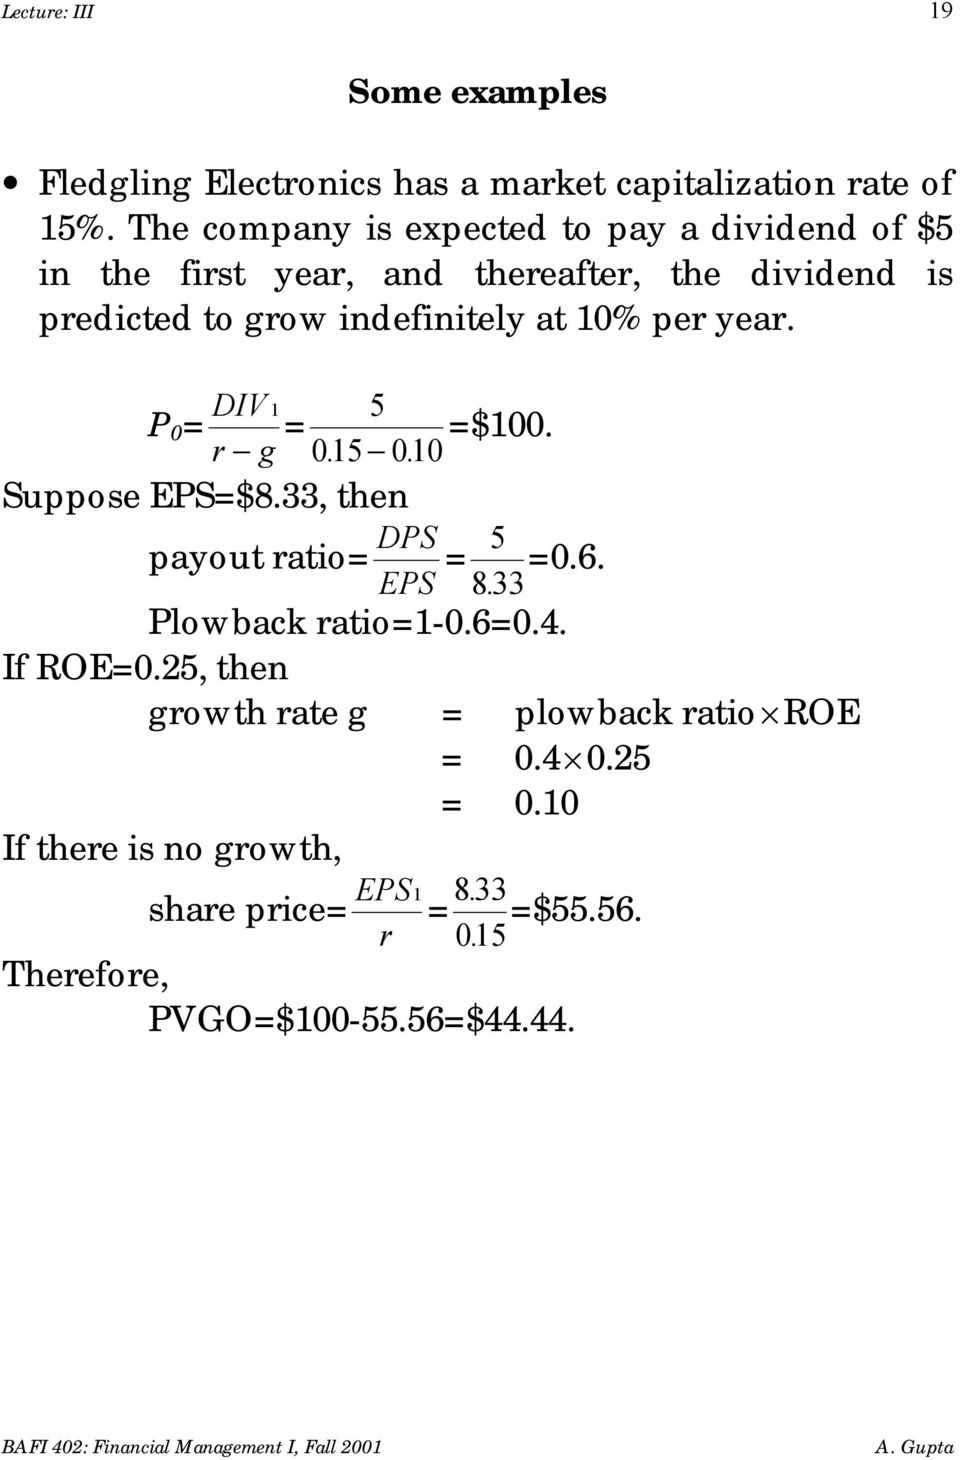 10% per year. P 0 = DIV 1 r g = 5 =$100. 015. 010. Suppose EPS=$8.33, then payout ratio= DPS =0.6. EPS = 5 833. Plowback ratio=1-0.